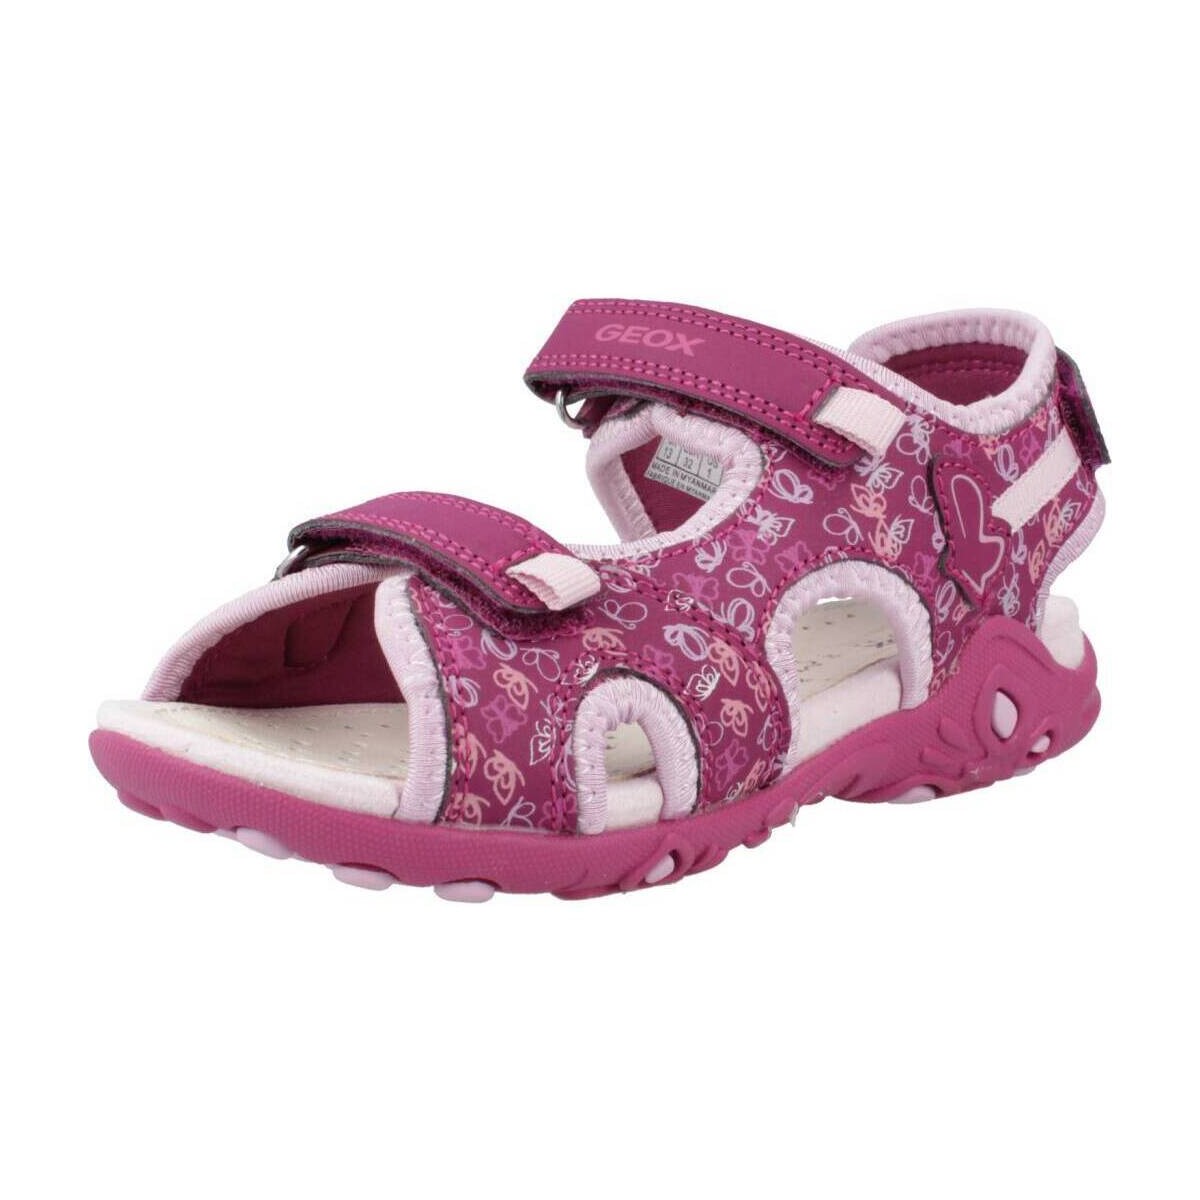 Schuhe Mädchen Sneaker Low Geox J SANDAL WHINBERRY G Rosa